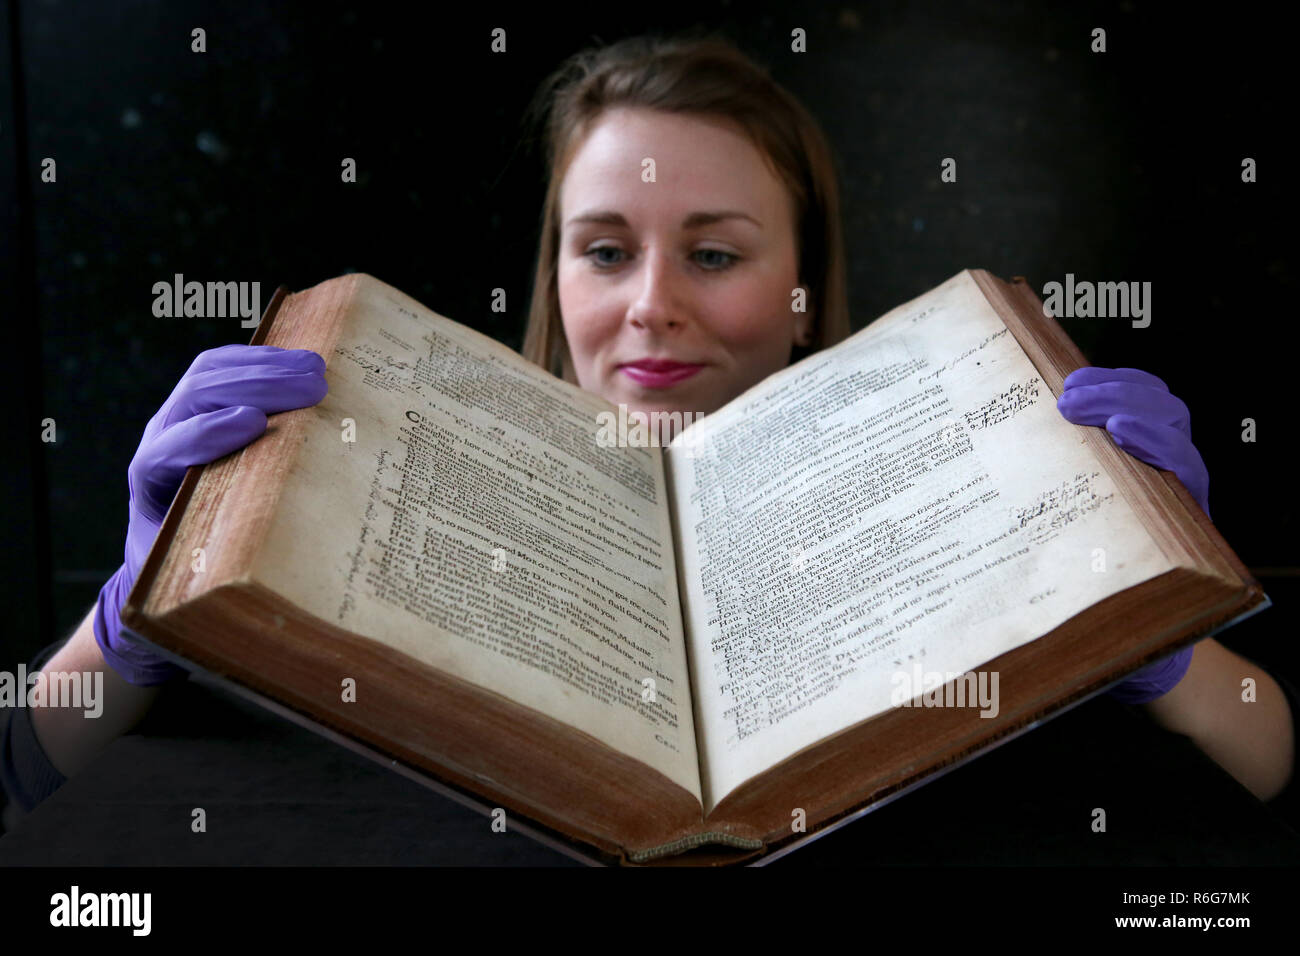 Exhibitions officer Kirsty MacNab, from the University of Edinburgh, takes a closer look at a unique volume of 17th Century plays by dramatist Ben Jonson which is on display in a new exhibition 'Rare Books : Expect the Unexpected' at the university's main library in Edinburgh. Stock Photo